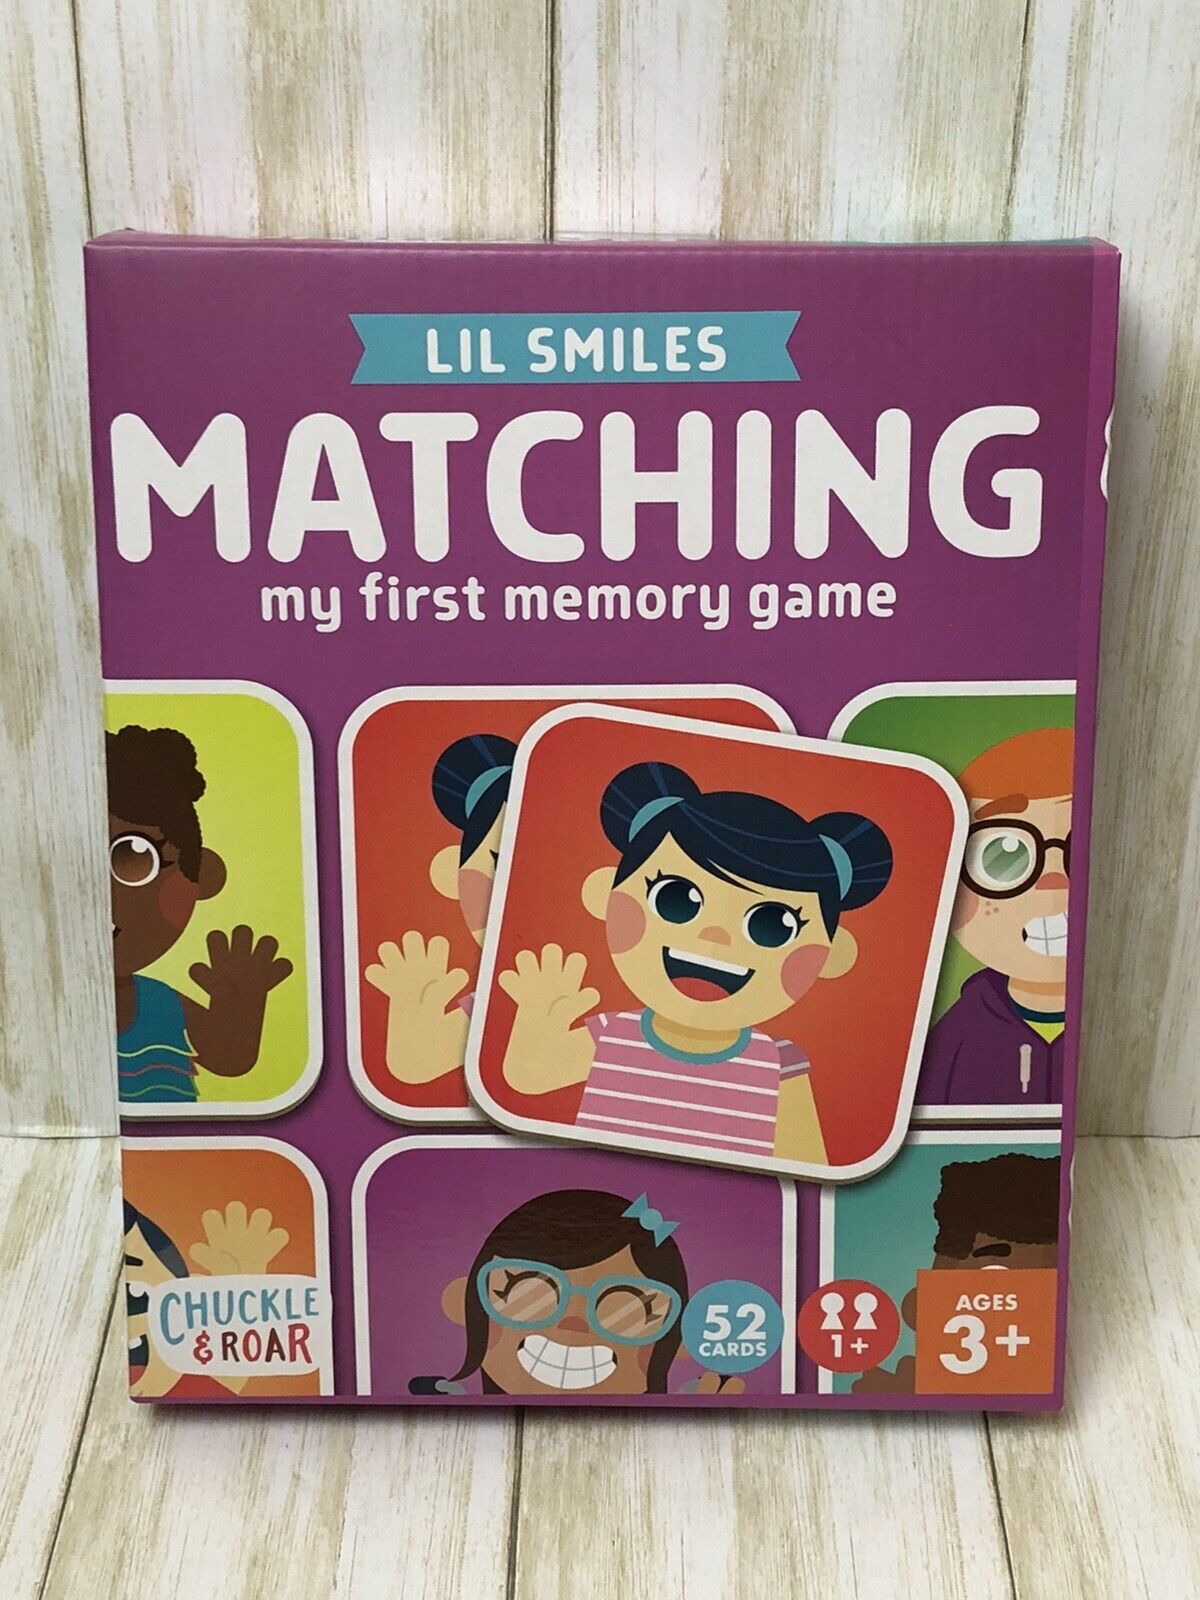 Chuckle & Roar Lil Smiles Matching Game - My First Memory Game